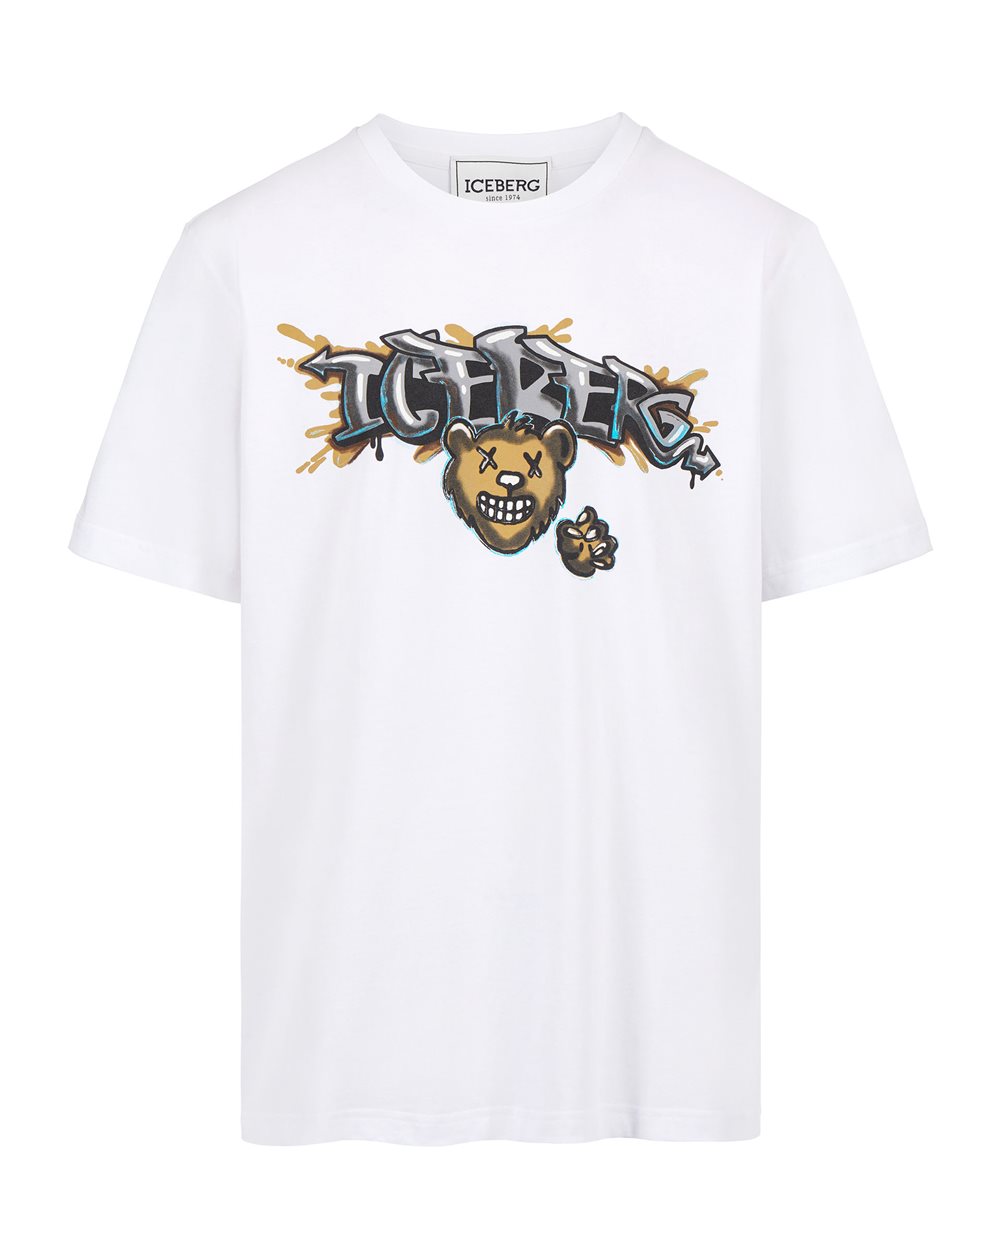 T-shirt with cartoon graphics and logo -  ( SECONDO STEP bx) PROMO SALDI UP TO 40% | Iceberg - Official Website